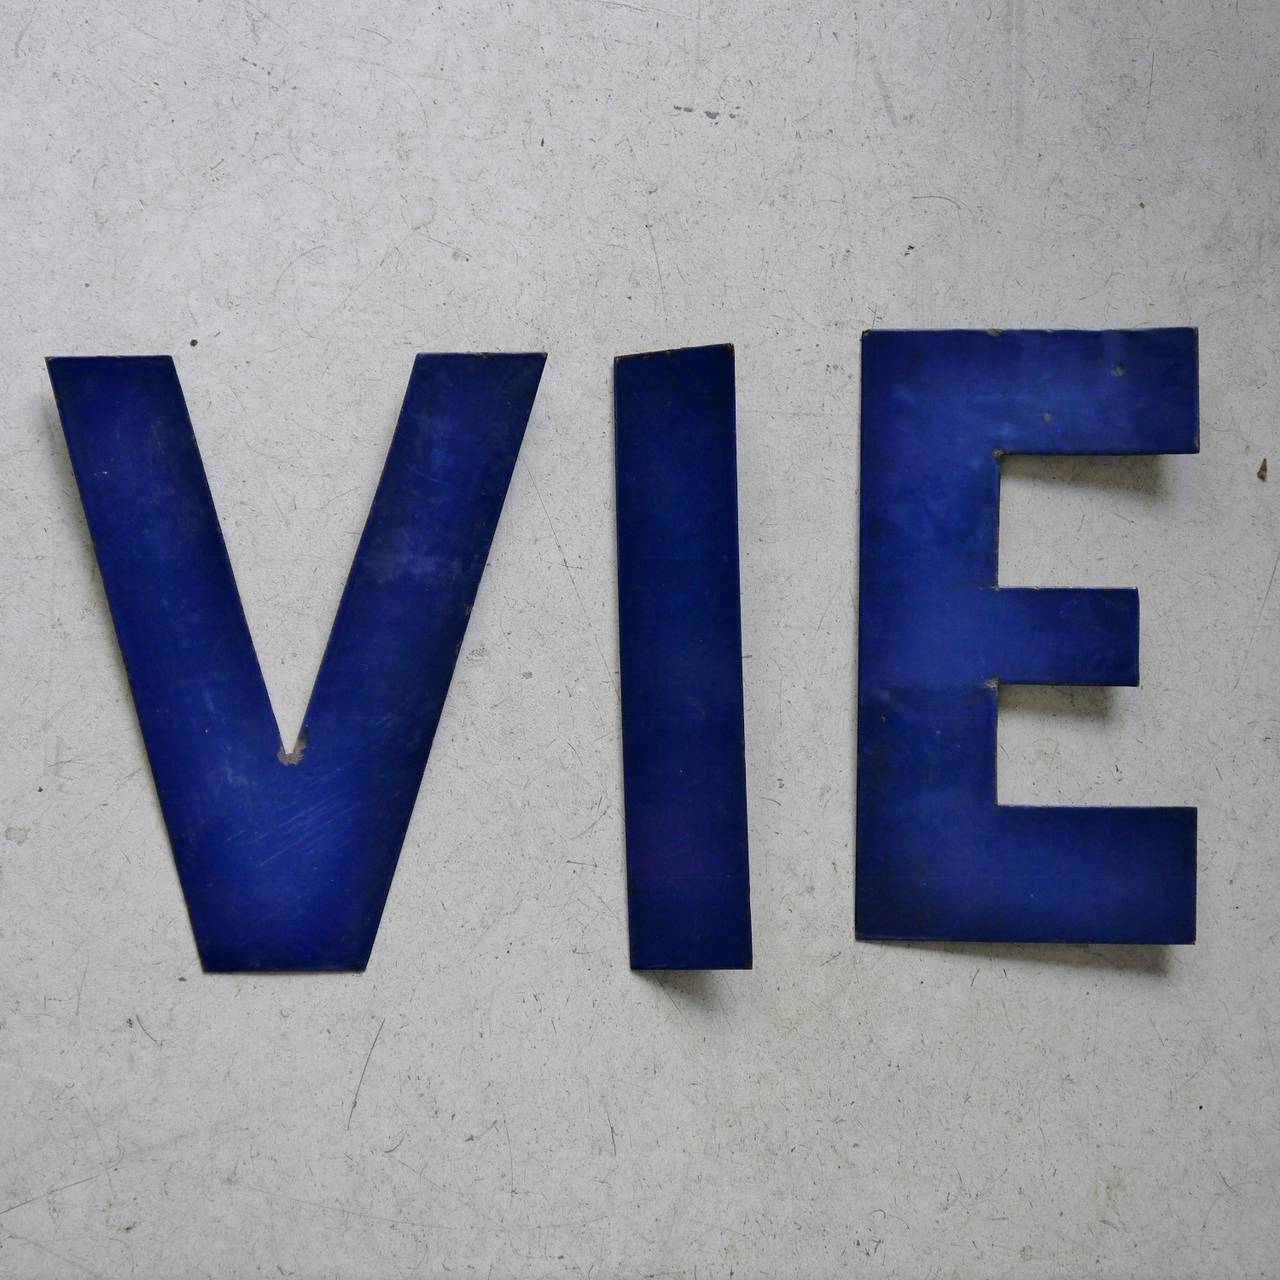 Vintage enamel letters in wonderful cobalt blue color, good condition and nice size. Please contact us in regards to exact letter required.
S x 2 and one each of E, 0, I, V, R, please contact us to confirm your order or request further images.